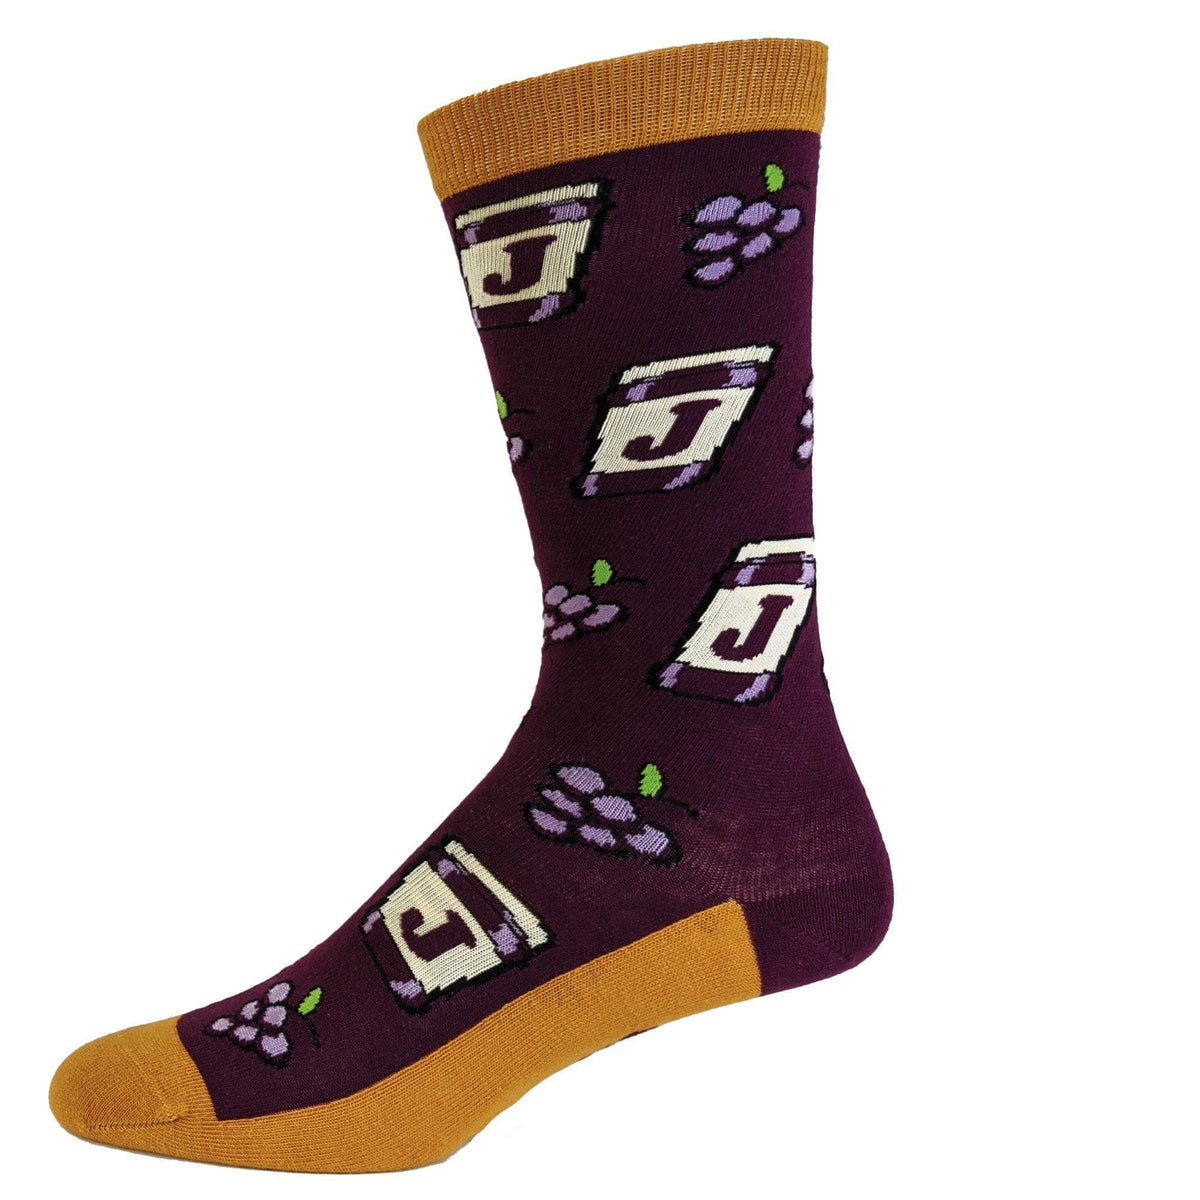 Womens Peanut Butter And Jelly Socks - Crazy Dog T-Shirts